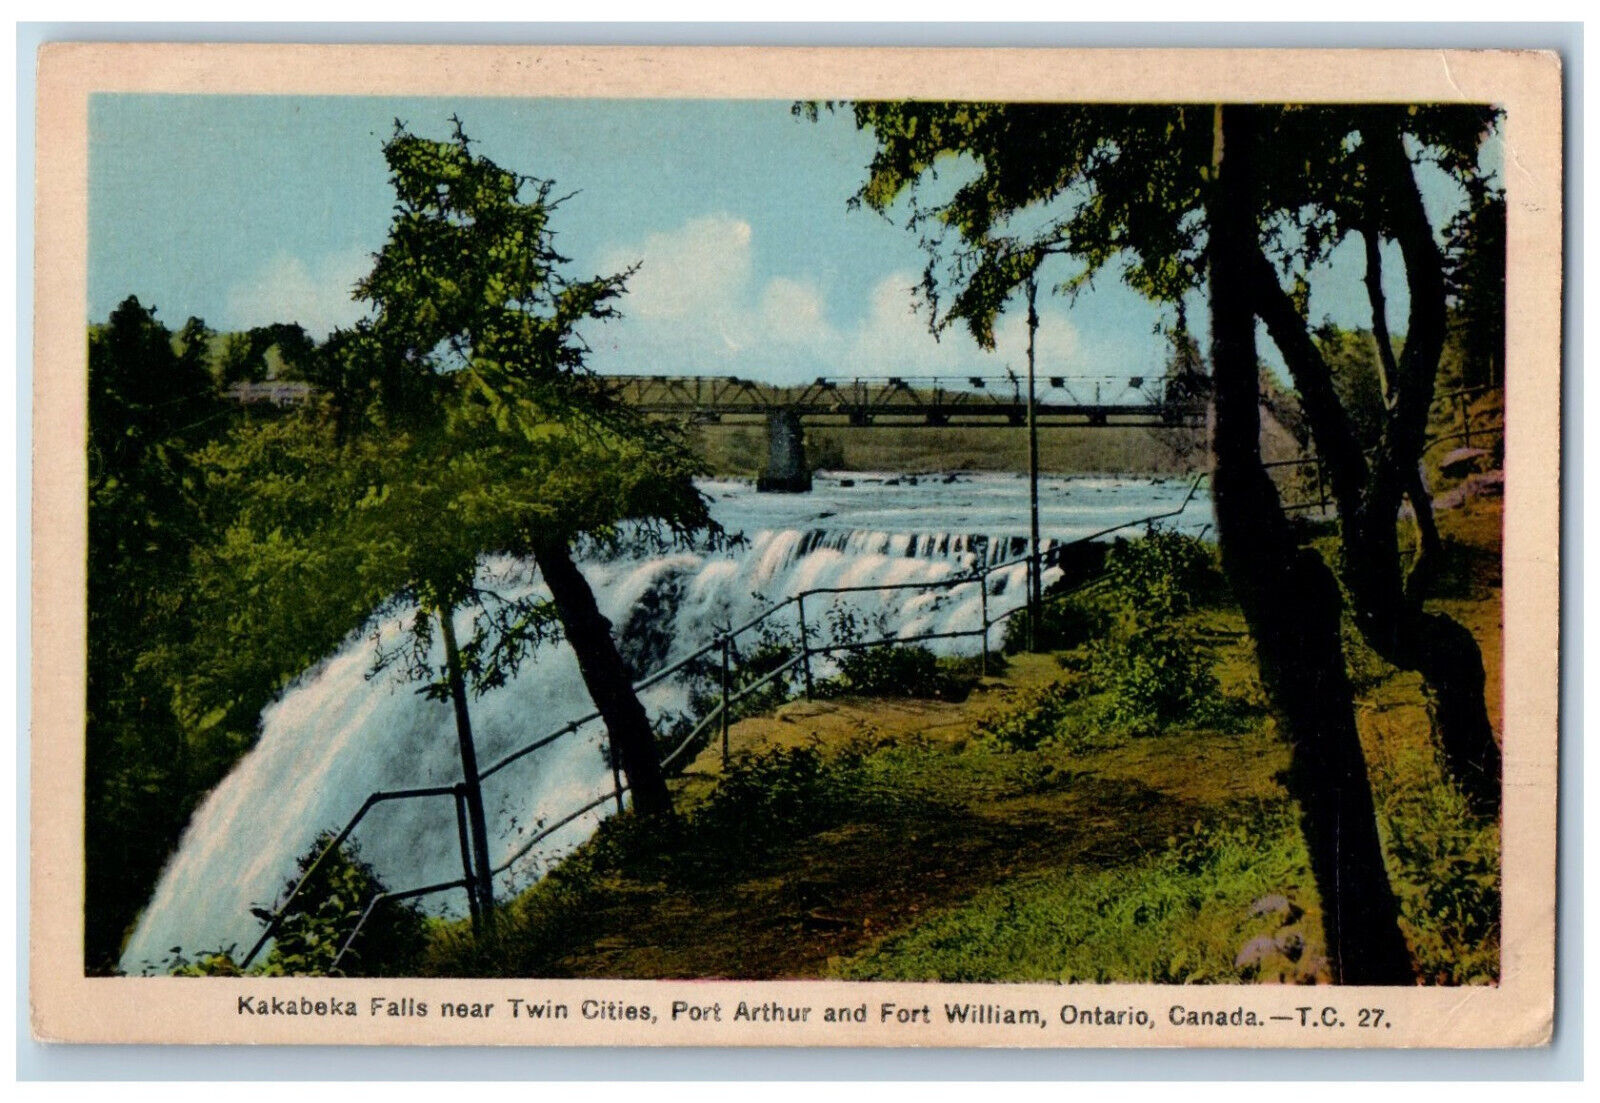 Fort William Ontario Canada Postcard Twin Cities Kakabeka Falls Side View c1940s